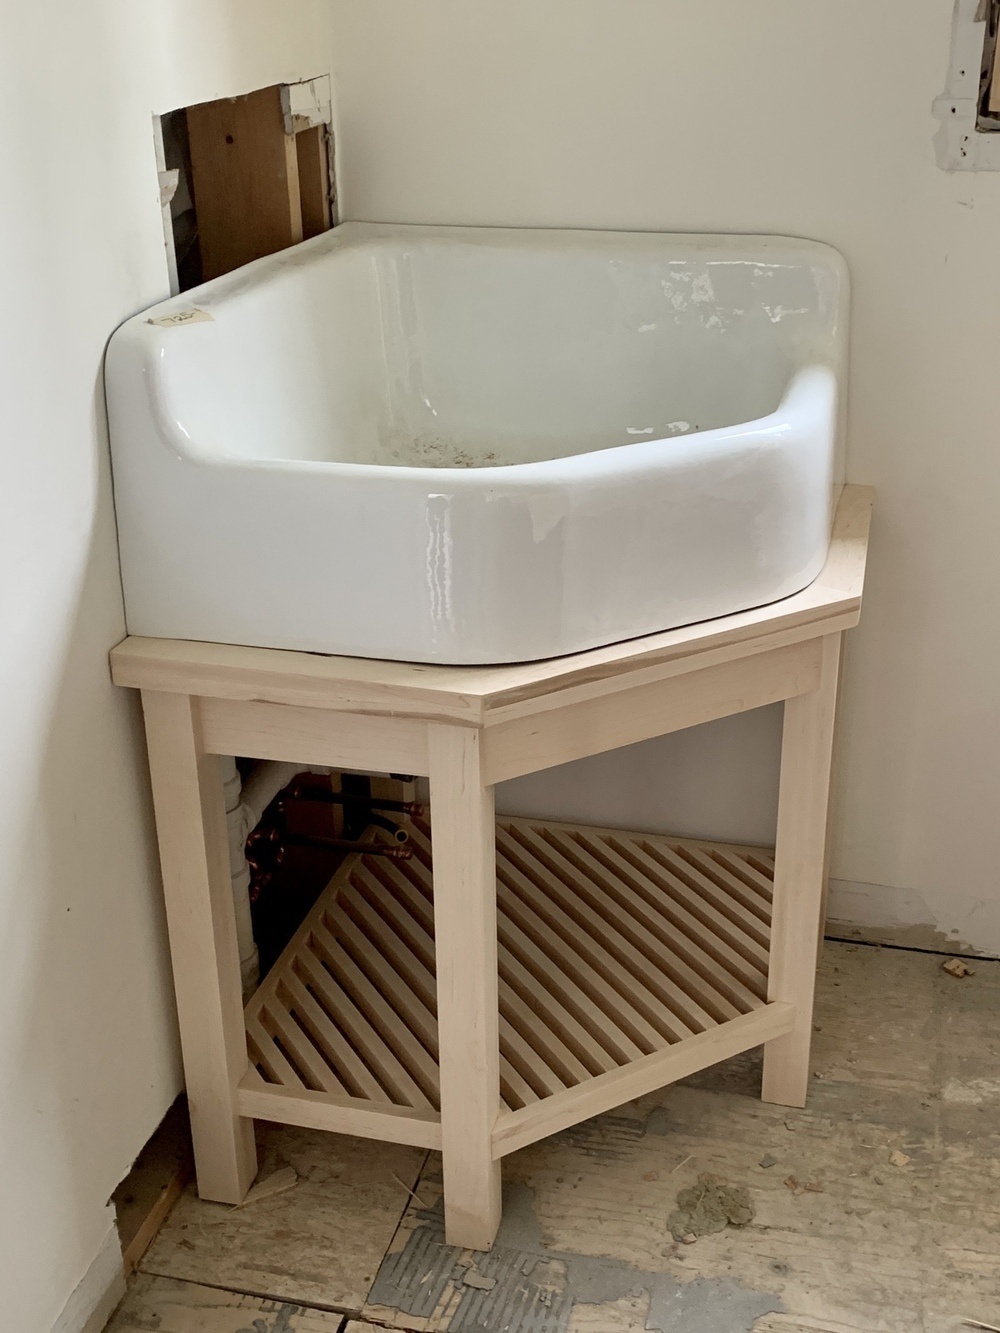 large corner sink on a table with shelf below made of slats on diagonal